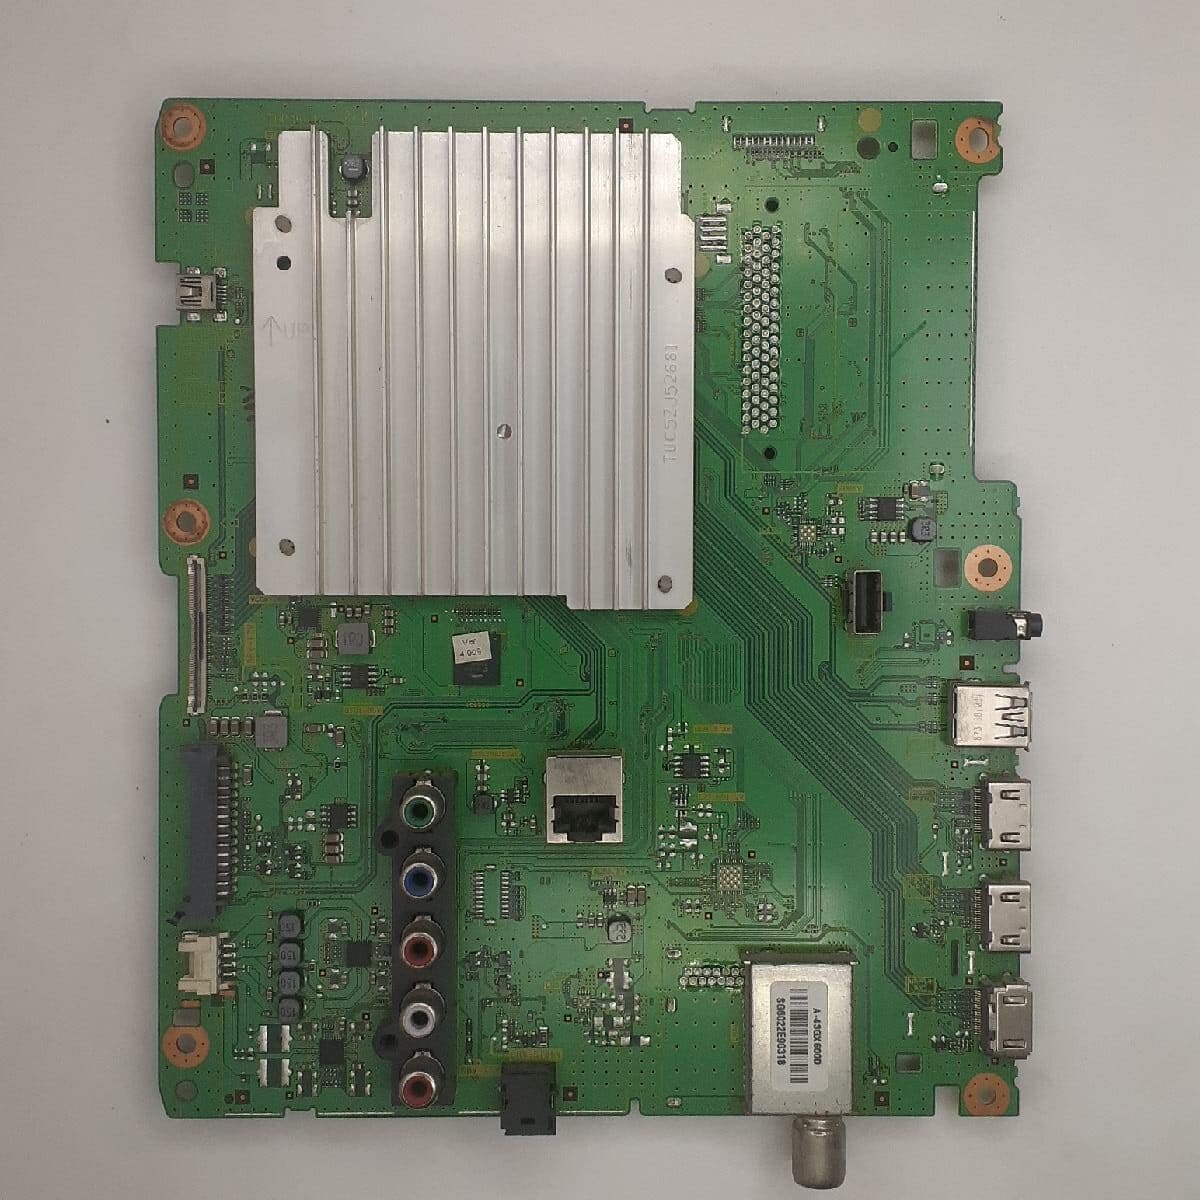 TH-43GX600D PANASONIC MOTHERBOARD FOR LED TV